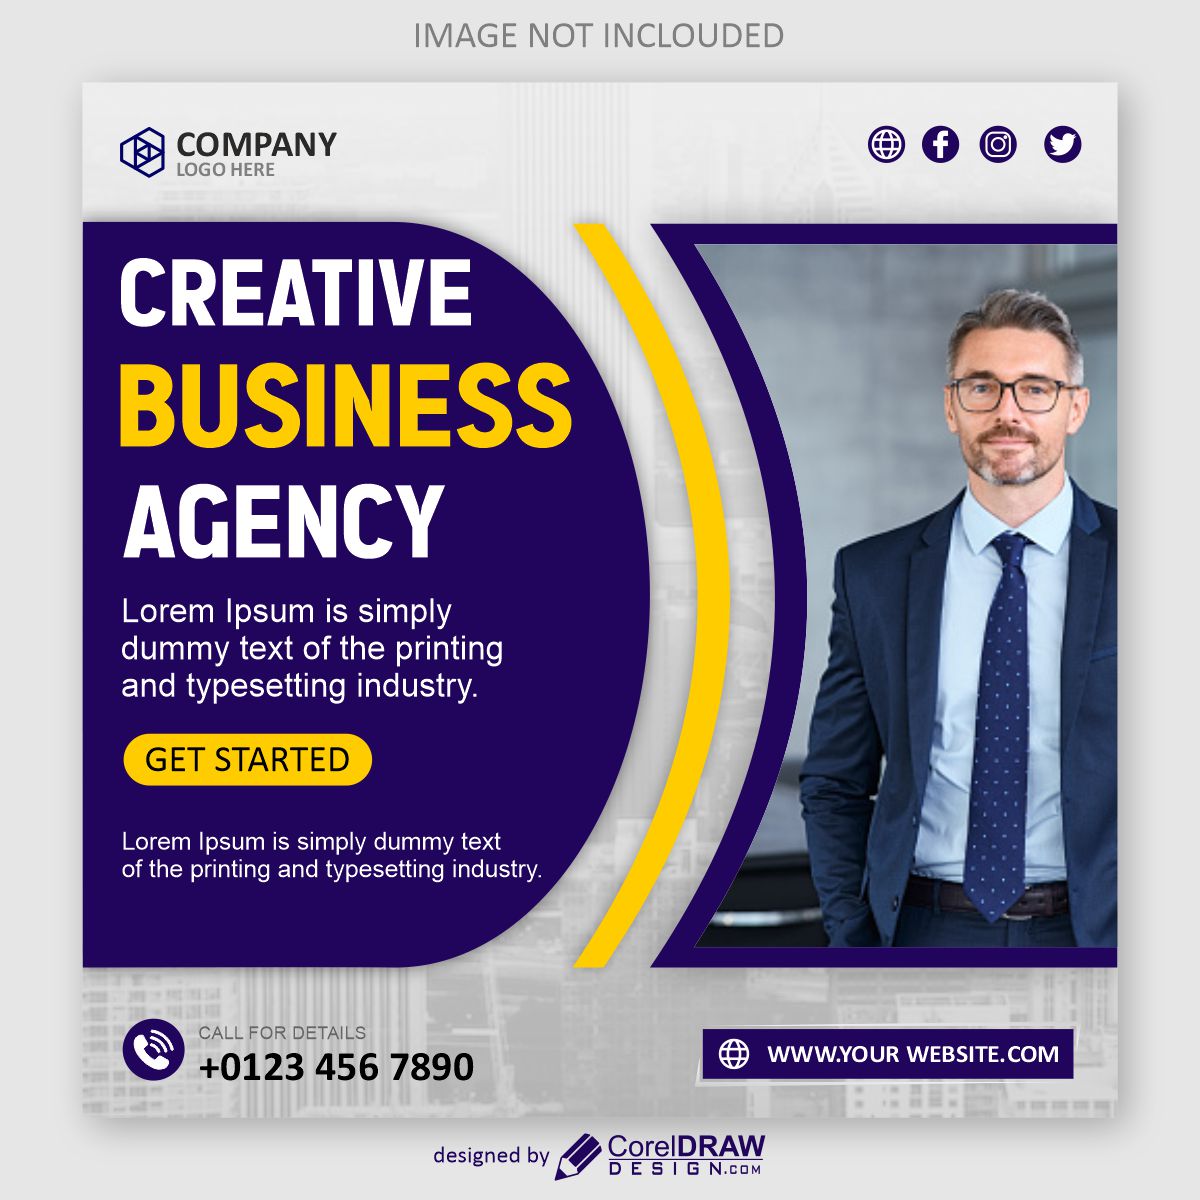 creative business agency poster vector design download for free